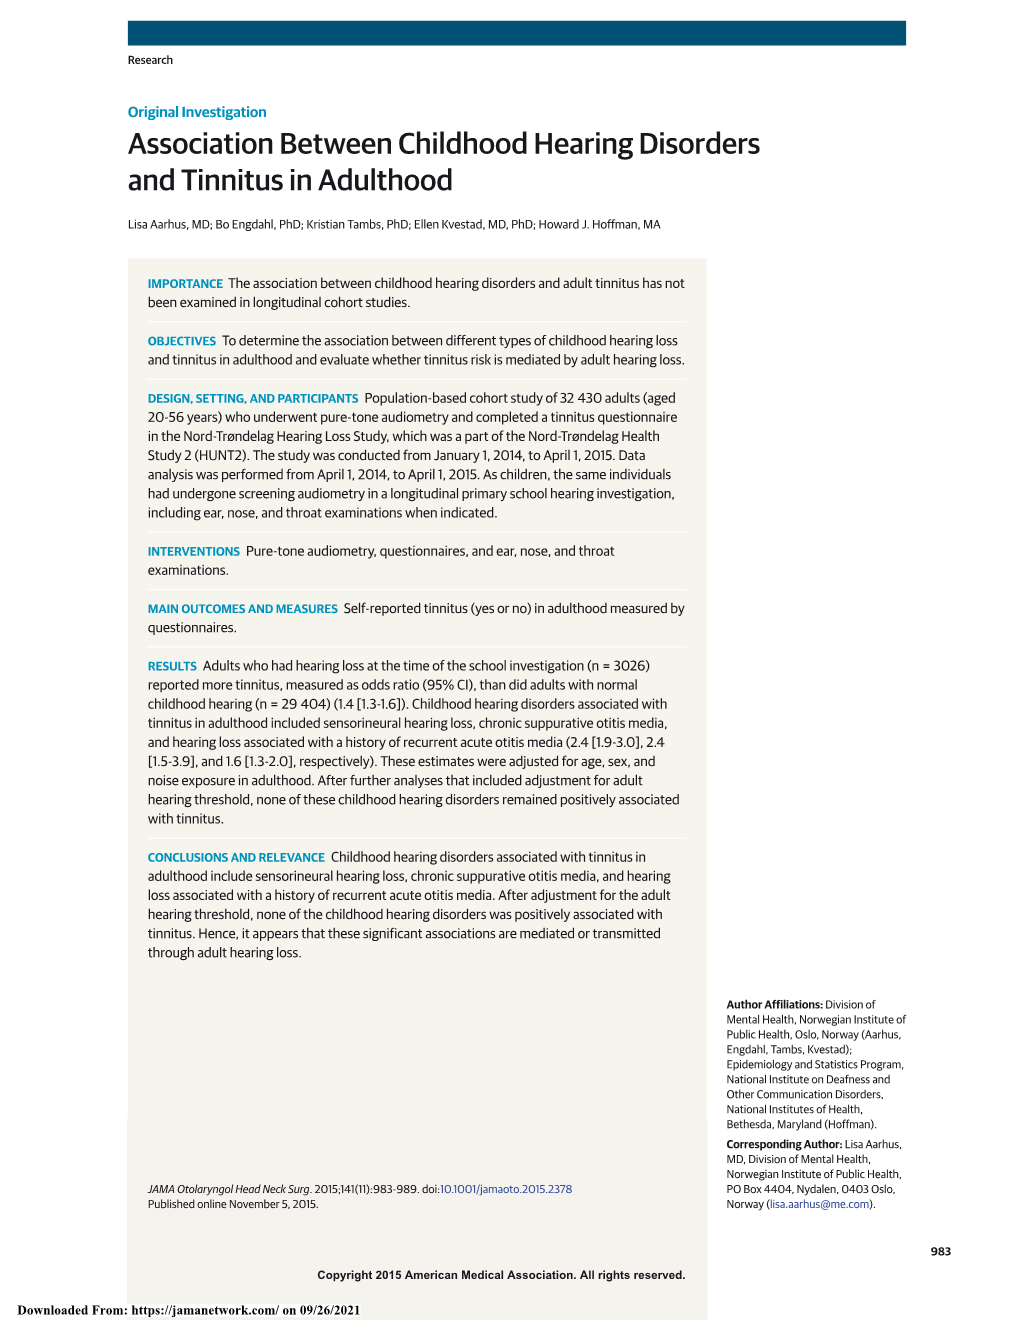 Association Between Childhood Hearing Disorders and Tinnitus in Adulthood